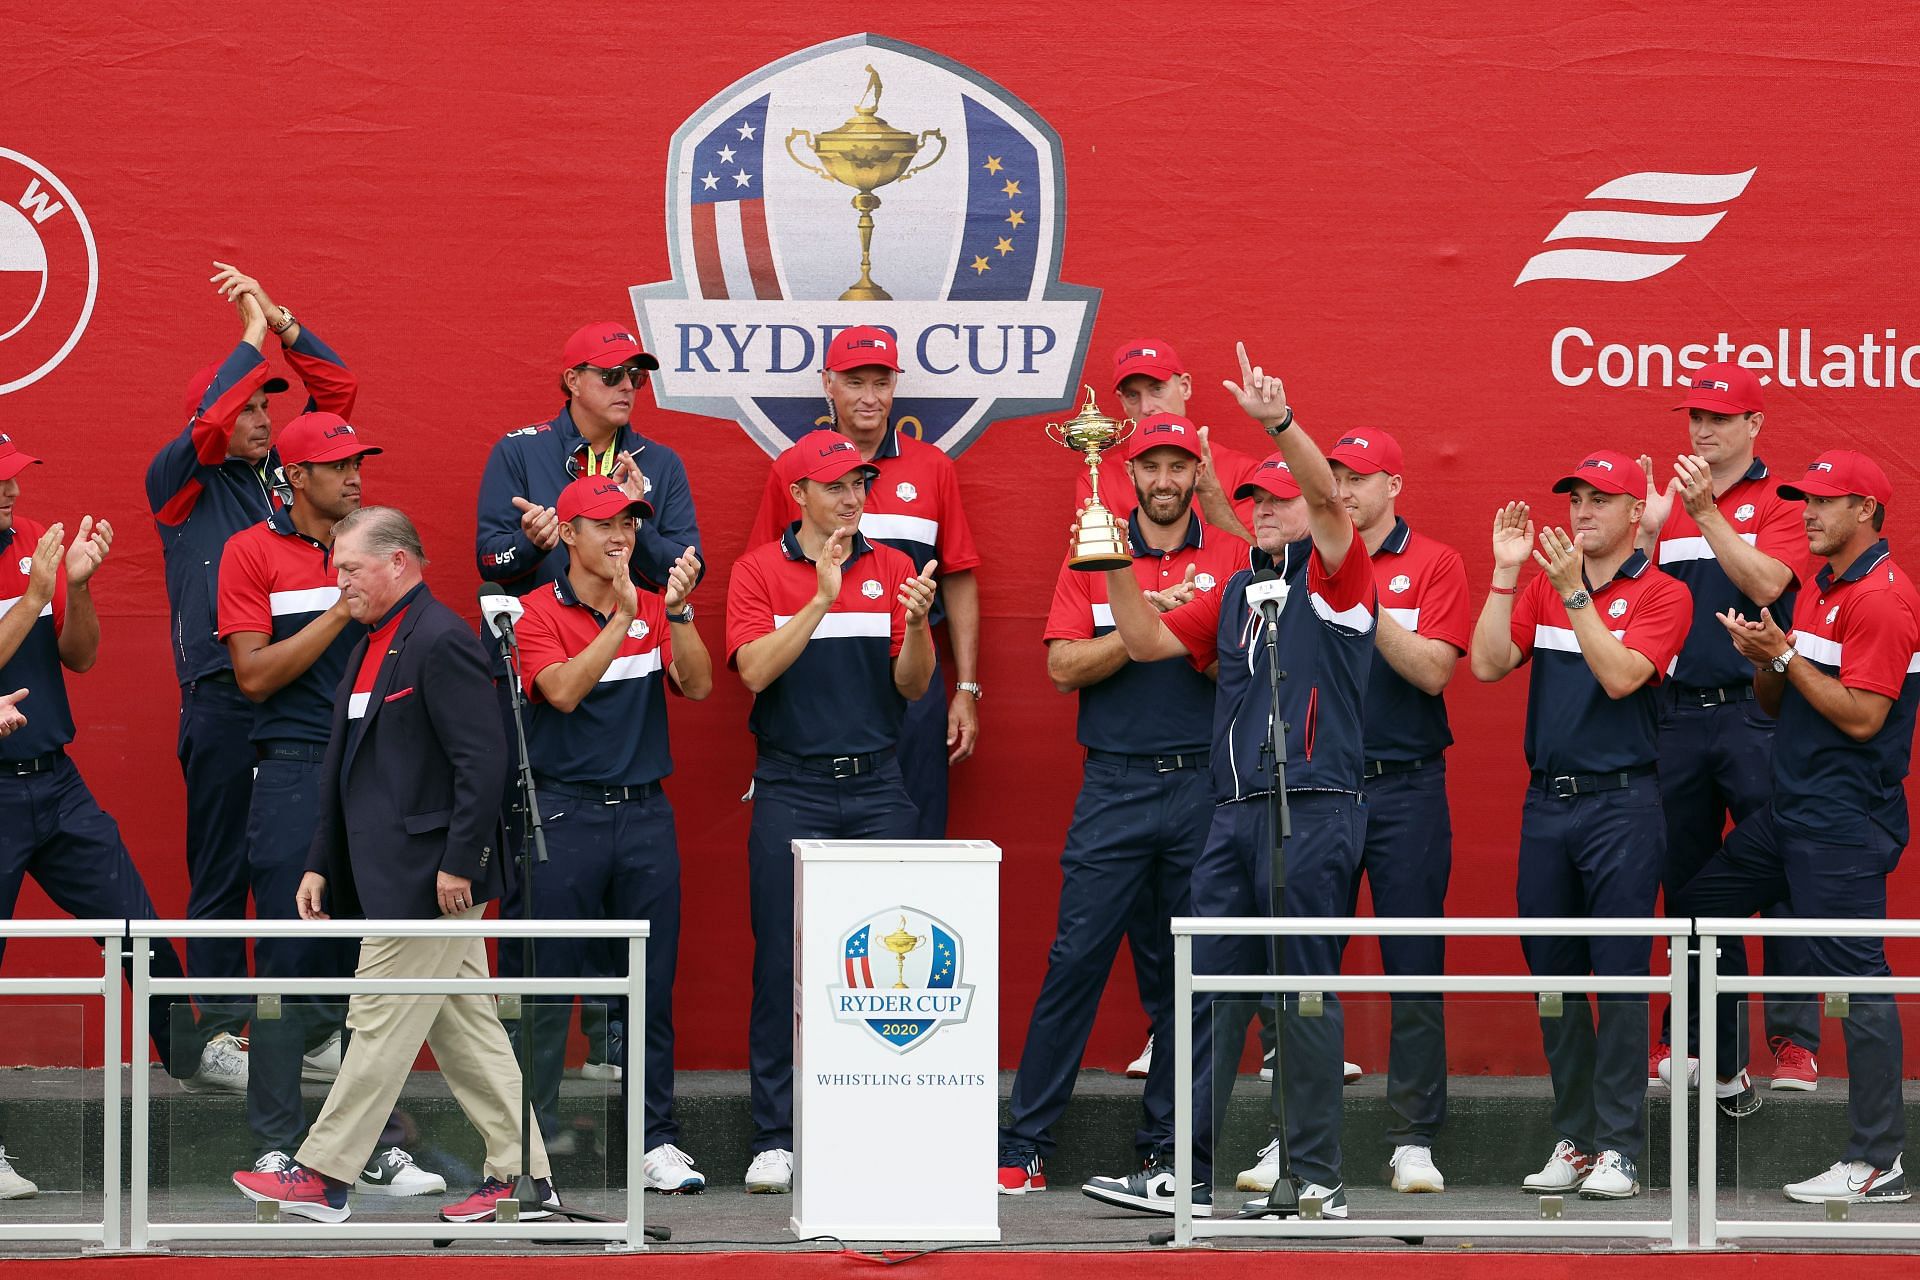 The US team won the Ryder Cup in 2021 (via Getty Images)